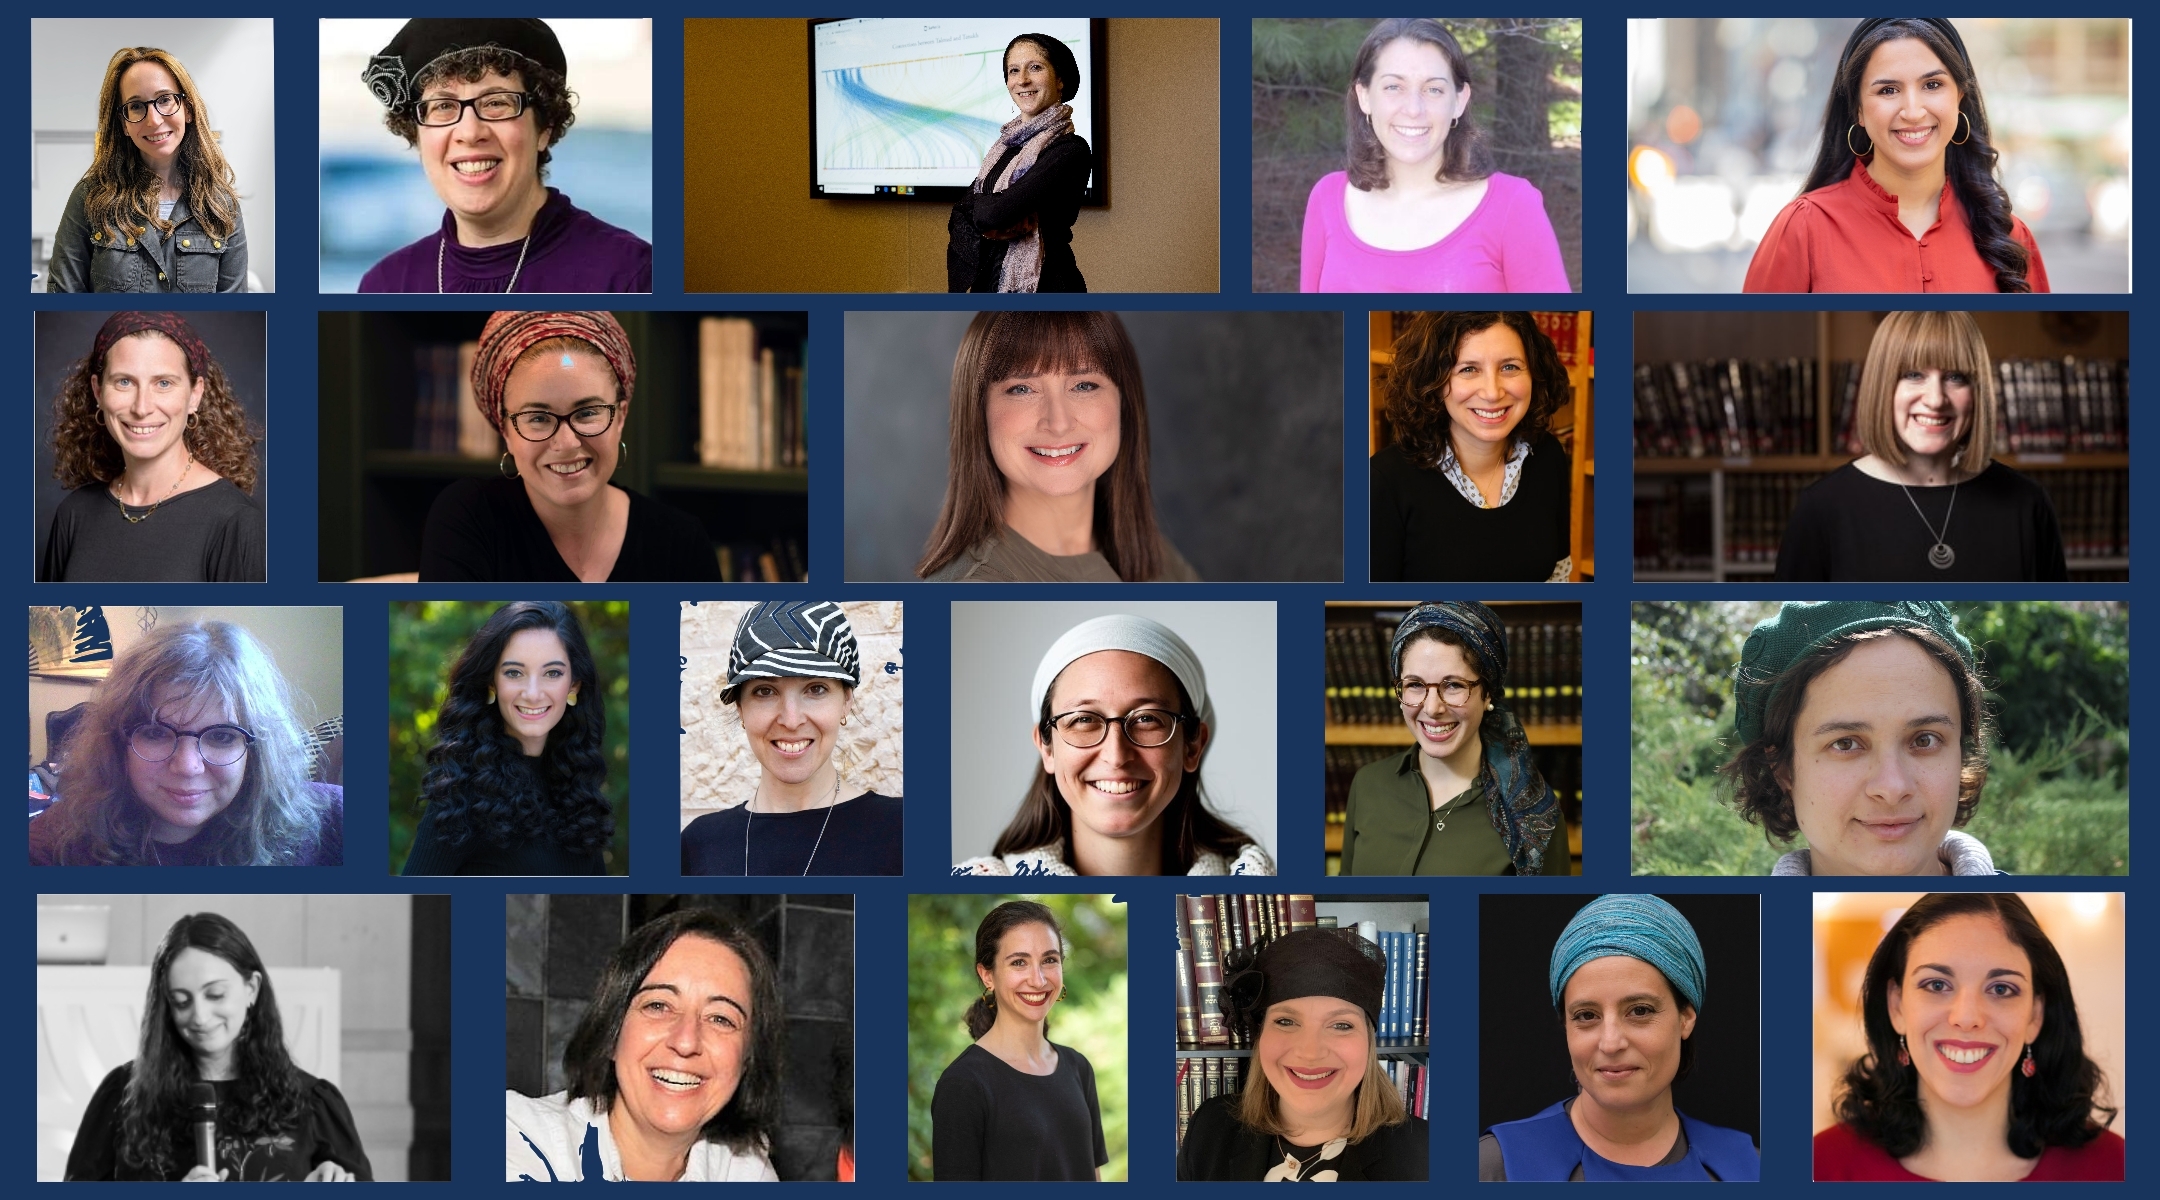 A digital Jewish library aims to add women’s Torah scholarship to its shelves — by helping them write it